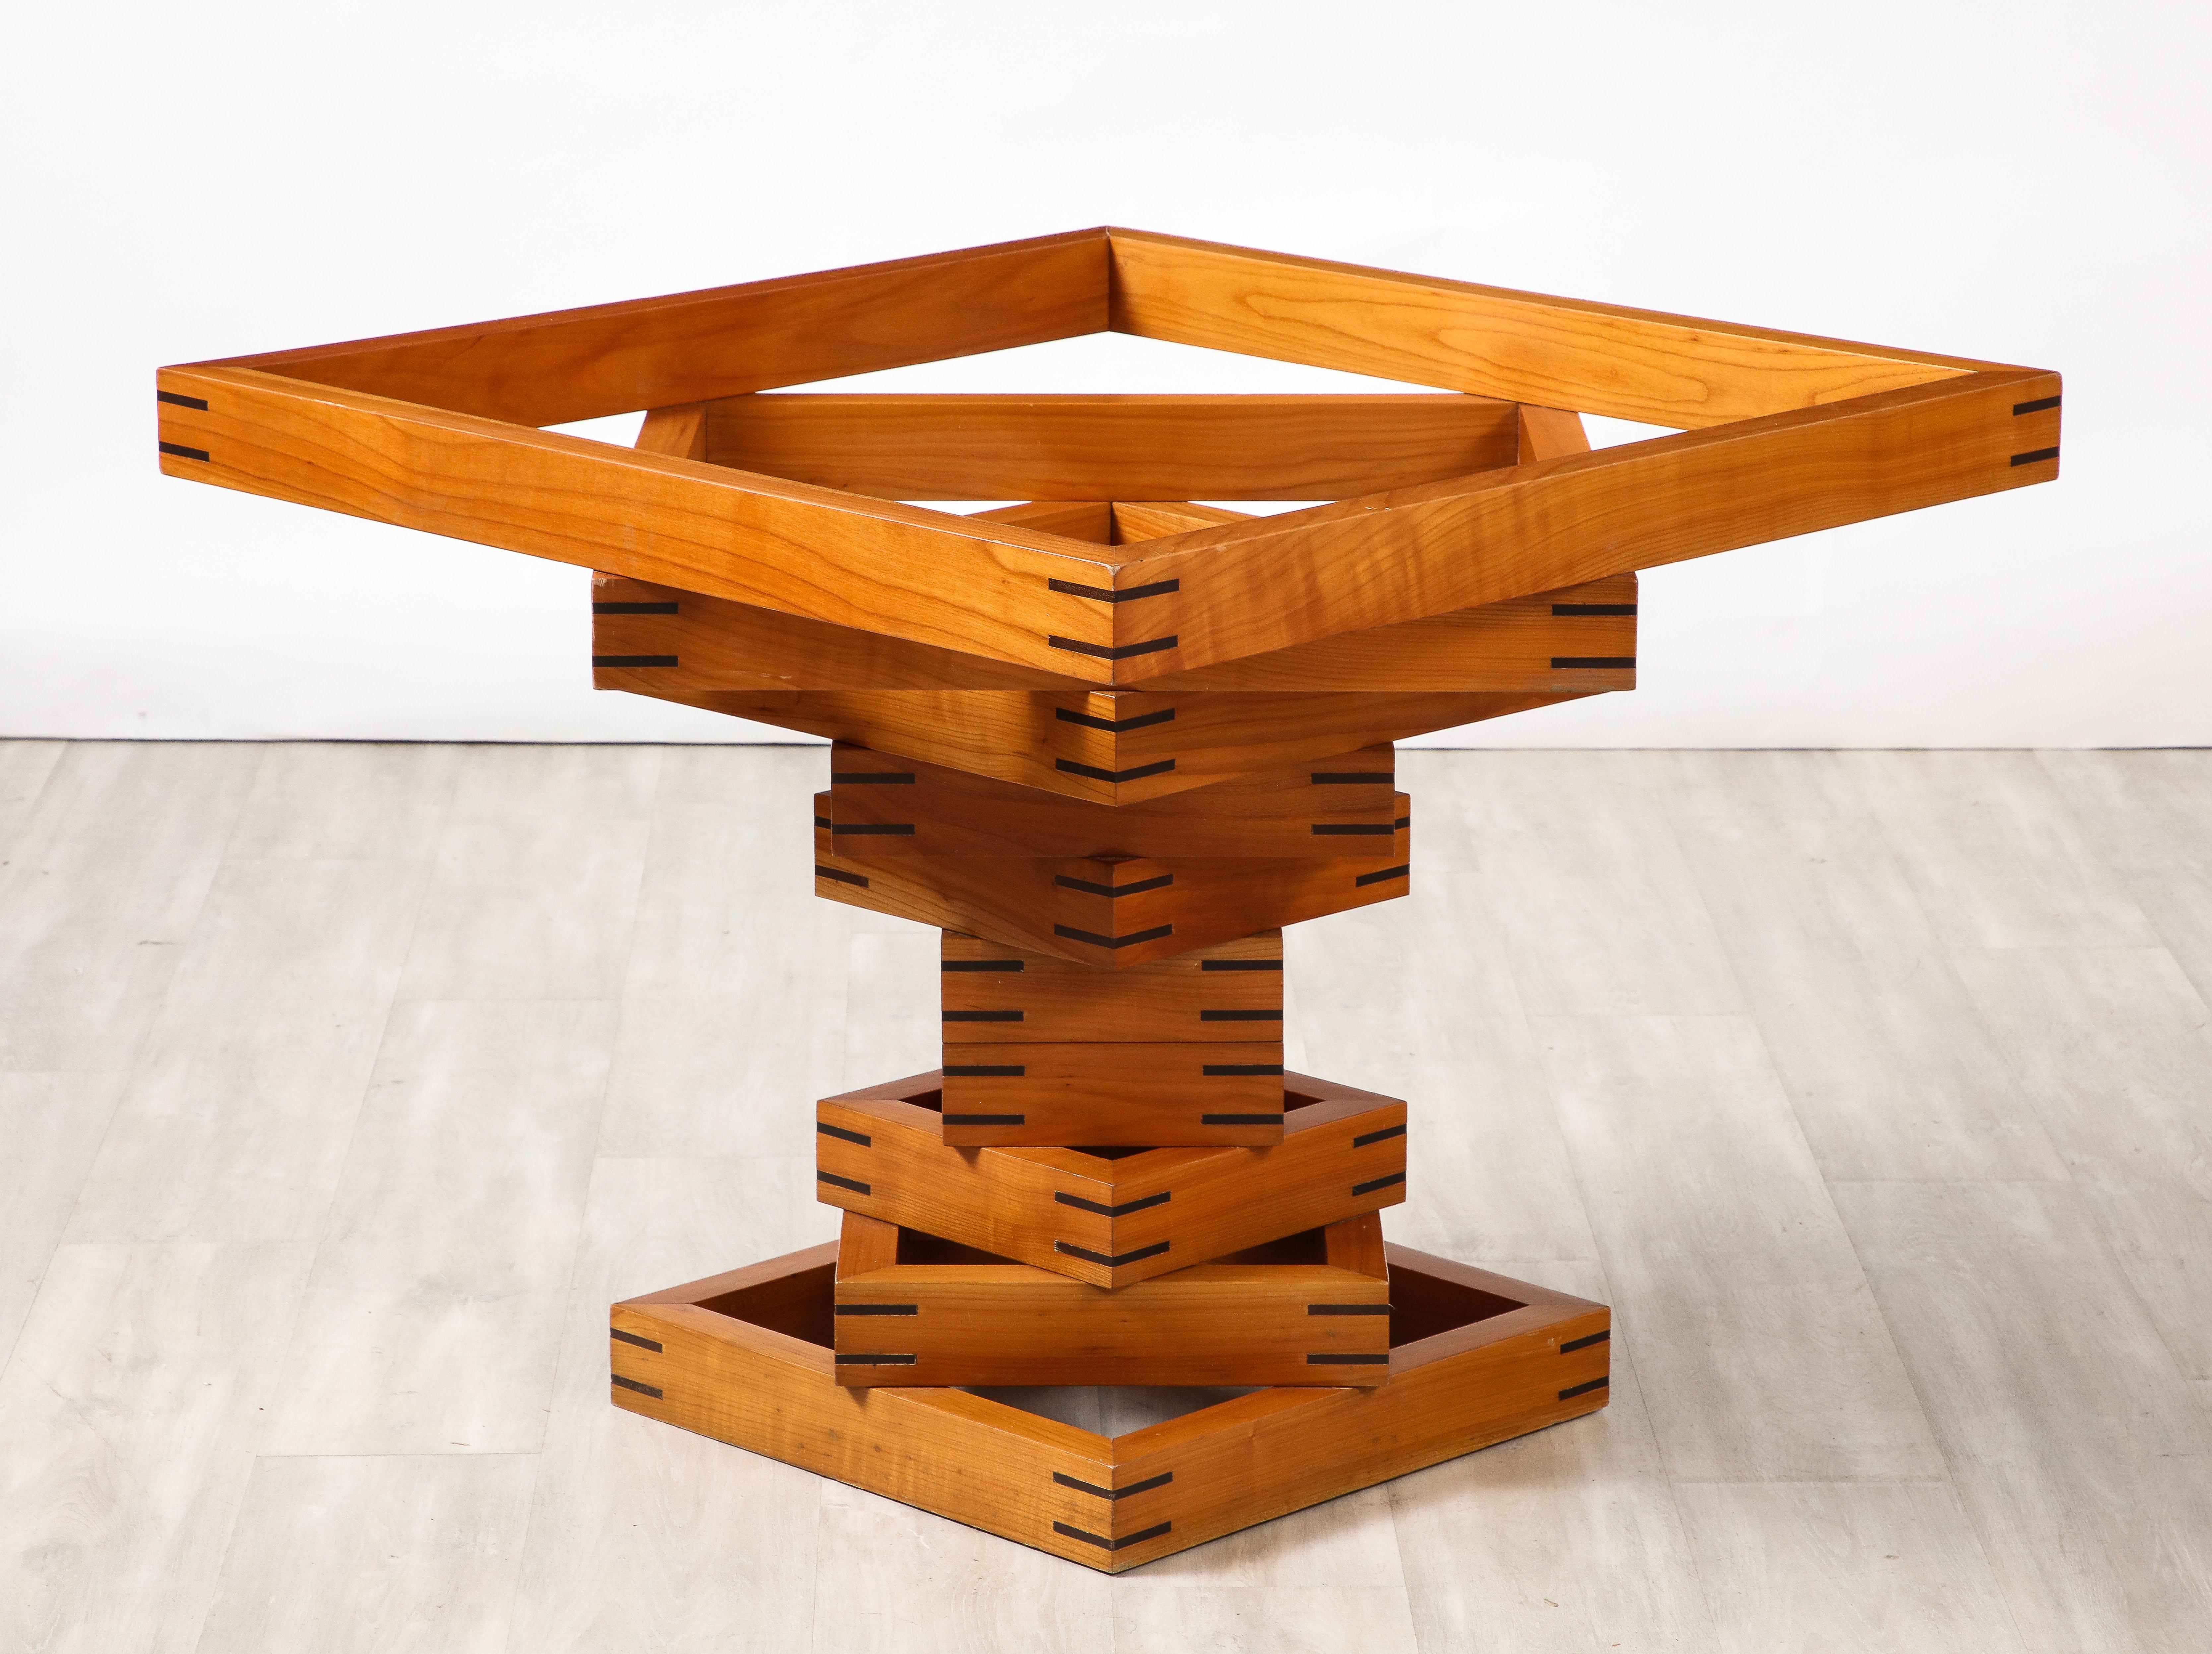  Ferdinando Meccani “Corinto” Dining Table Italy, 1978 In Good Condition For Sale In New York, NY